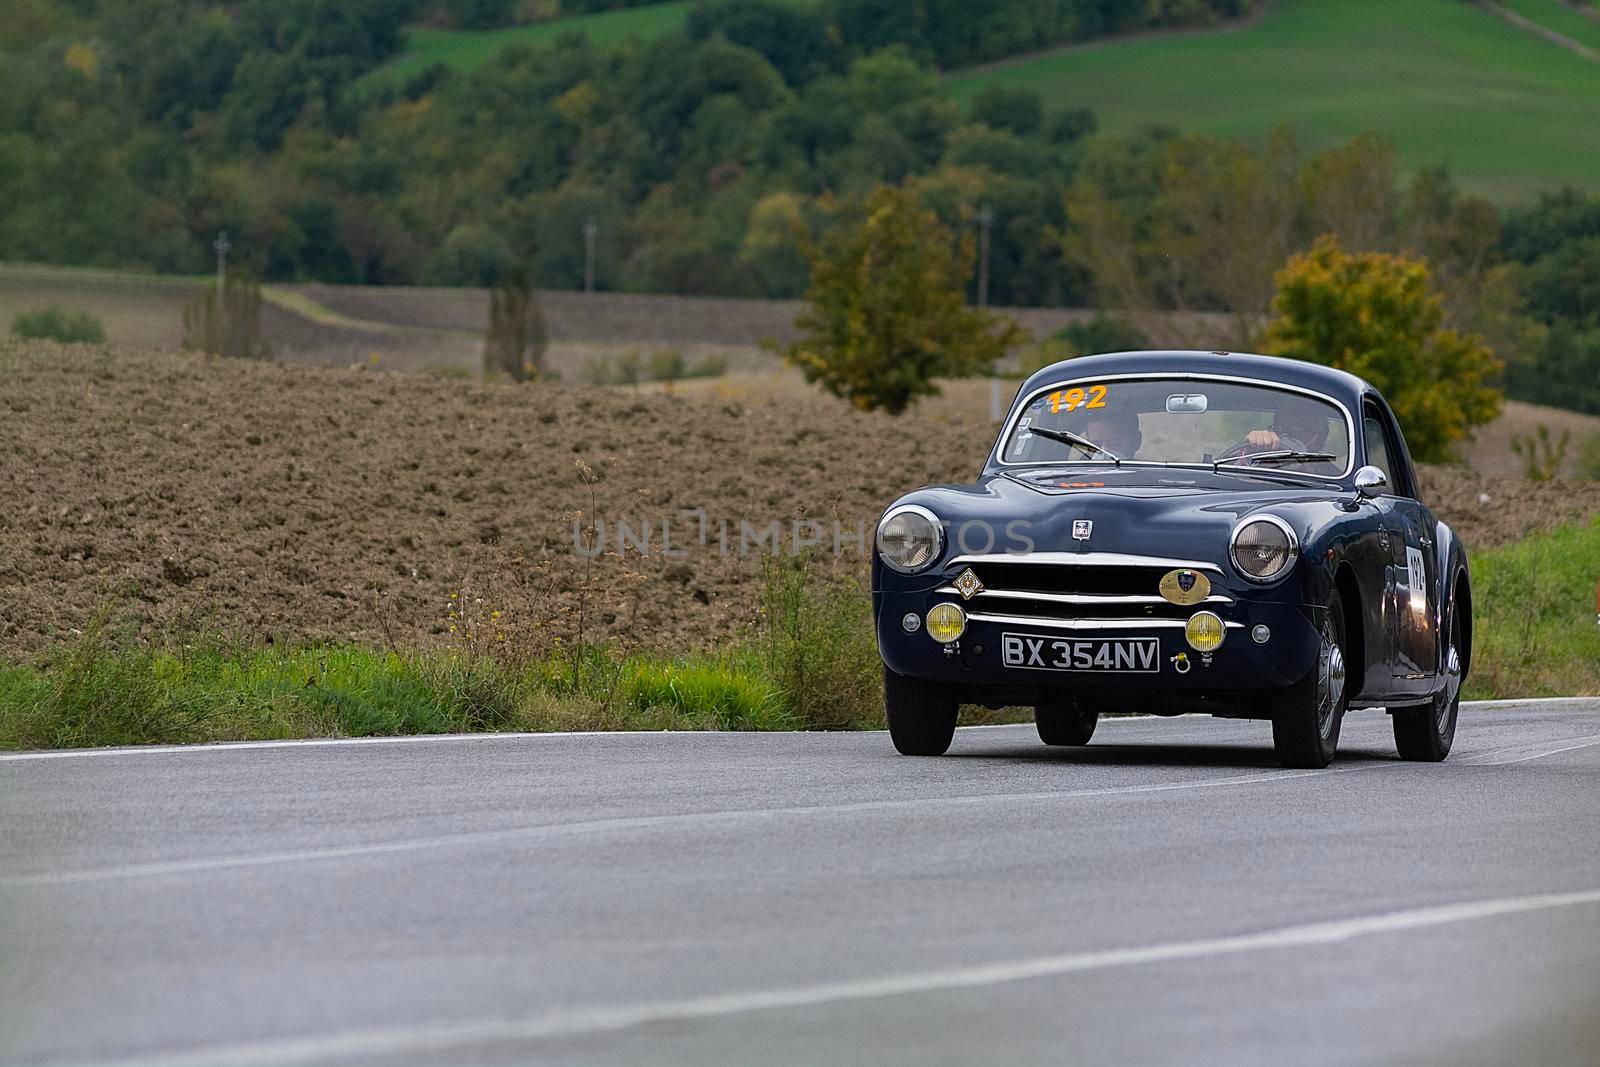 SIMCA 9 ARONDE COUPÉ 1952 on an old racing car in rally Mille Miglia 2020 the famous italian historical race (1927-1957) by massimocampanari